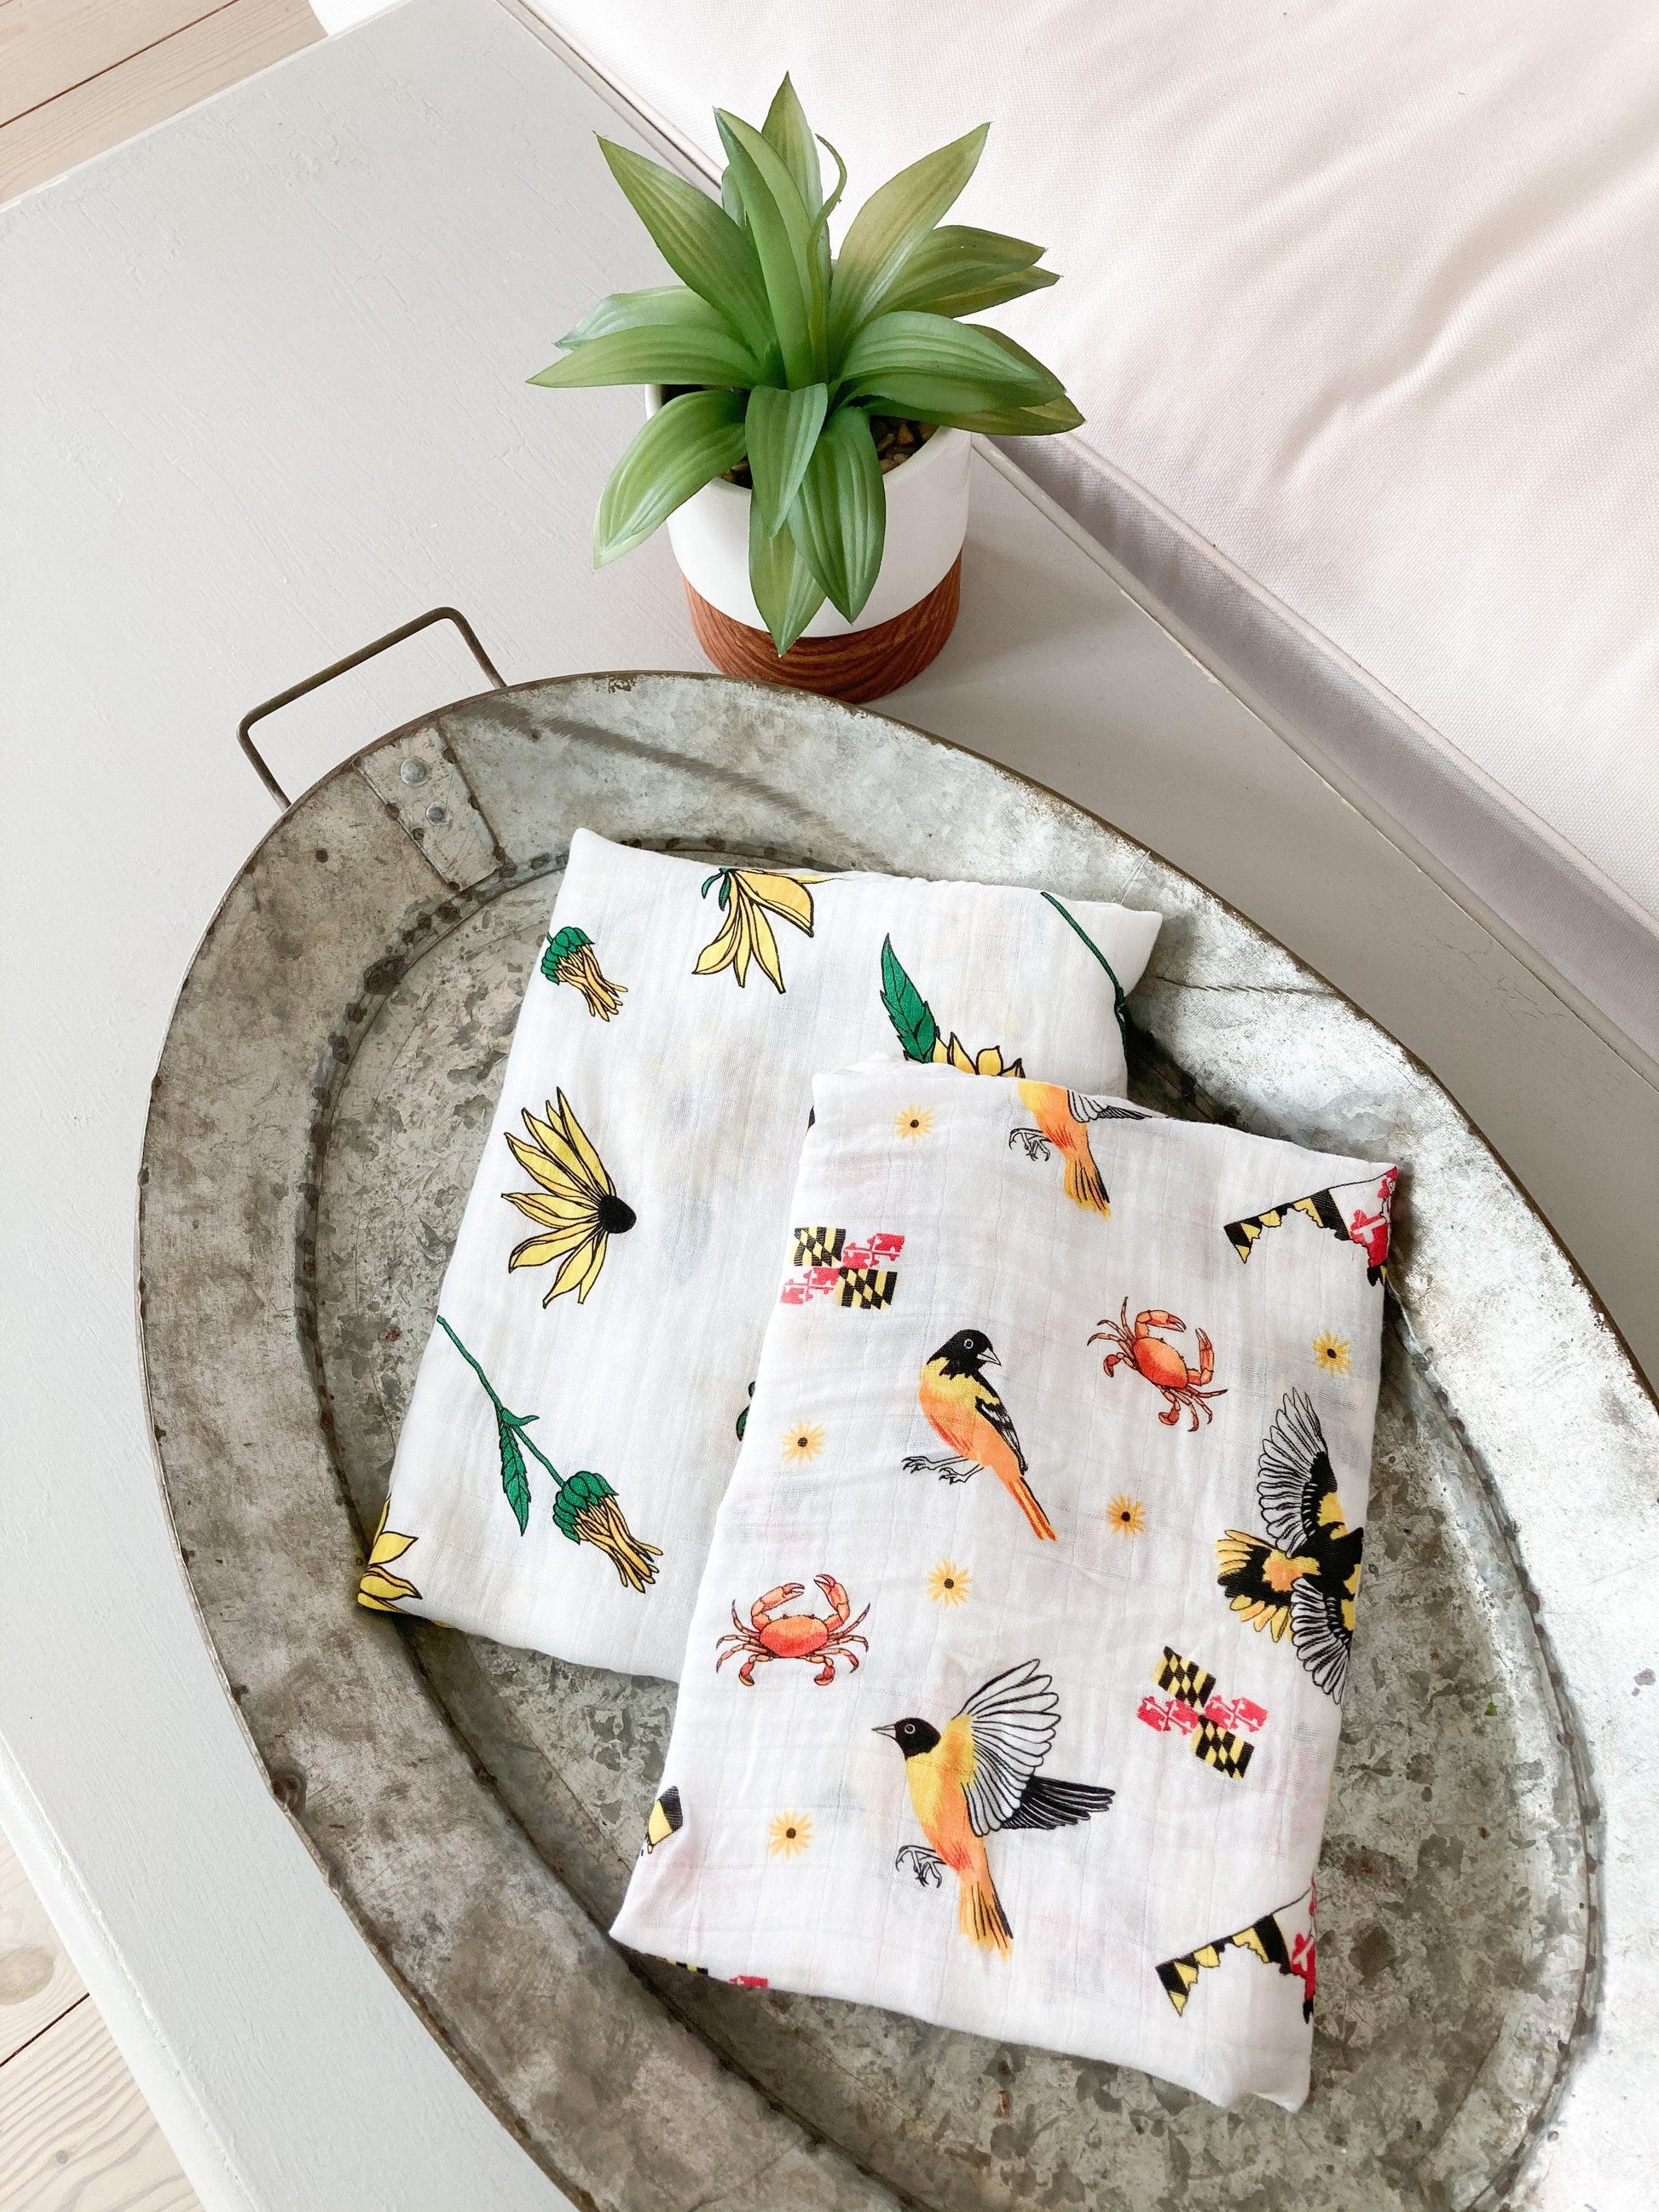 White muslin baby swaddle blanket with Maryland-themed illustrations, including crabs, flags, and lighthouses.